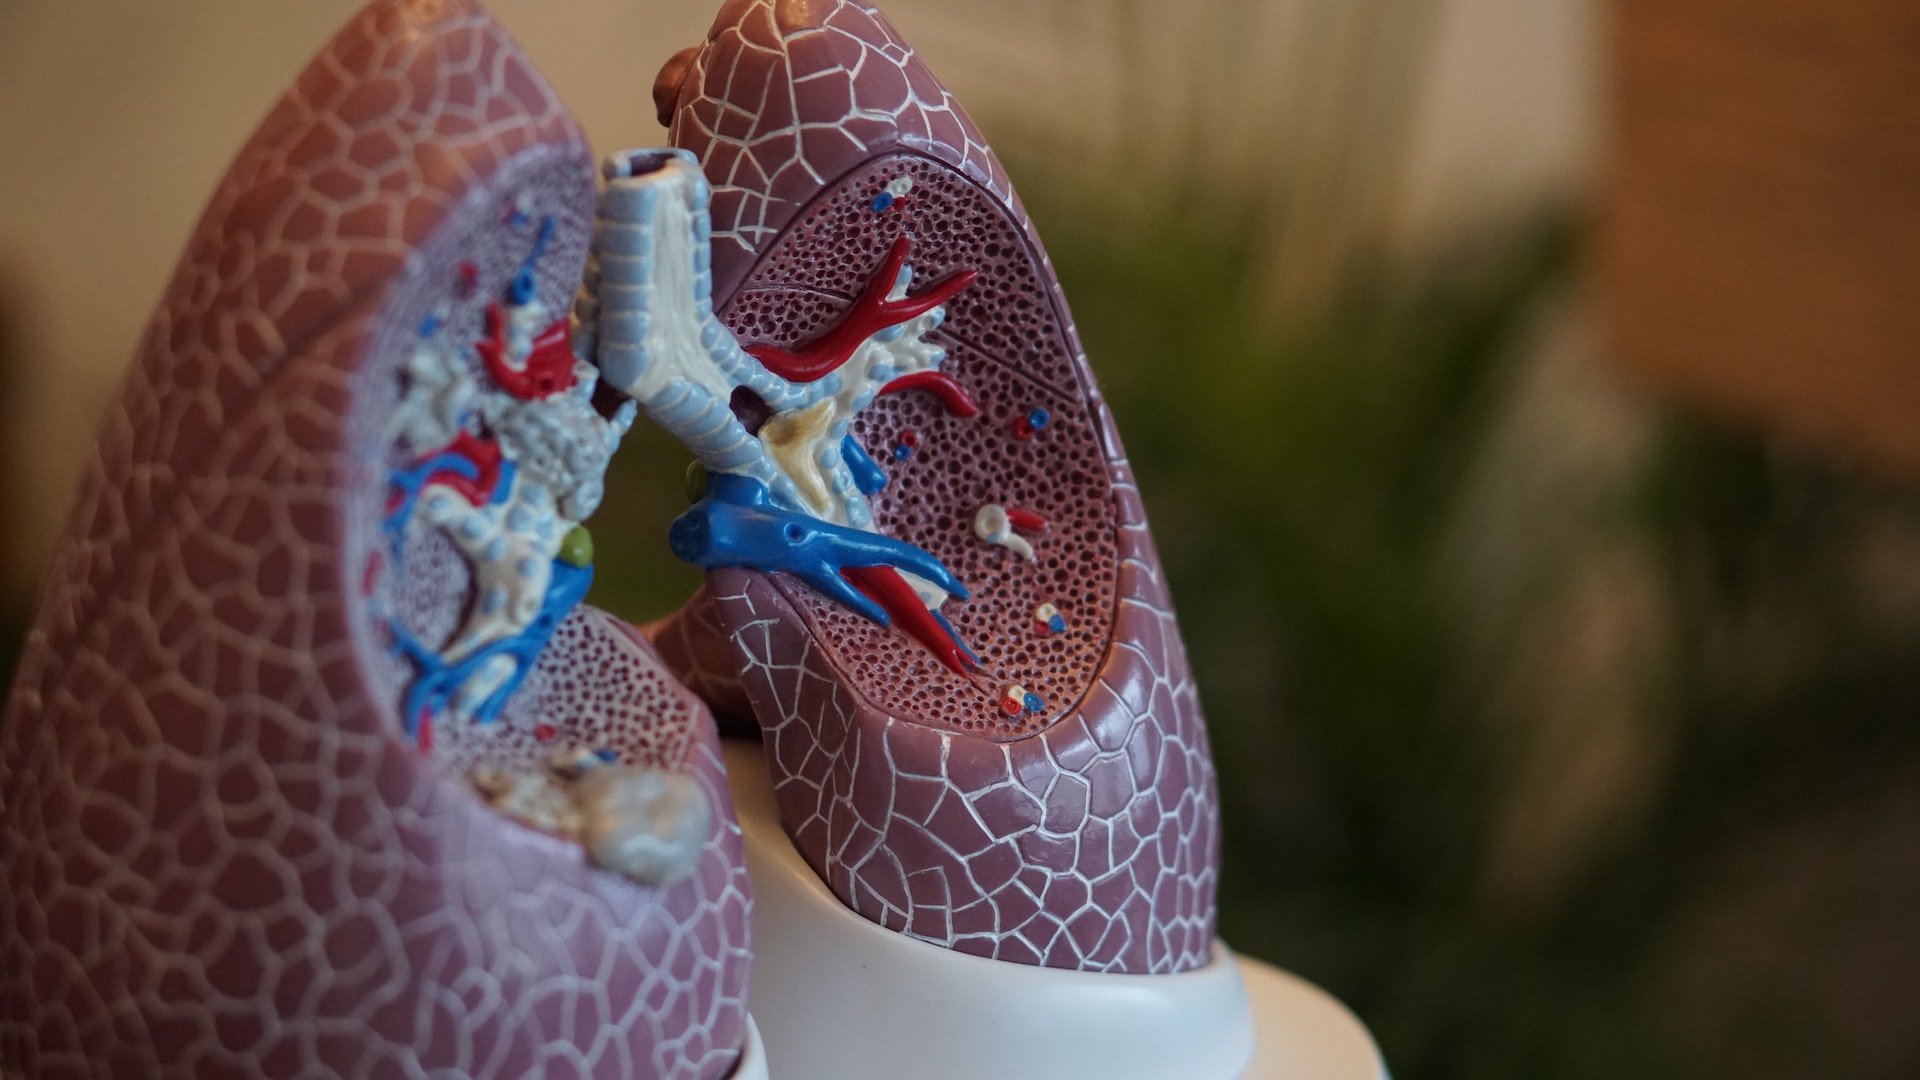 A medical model of the lungs